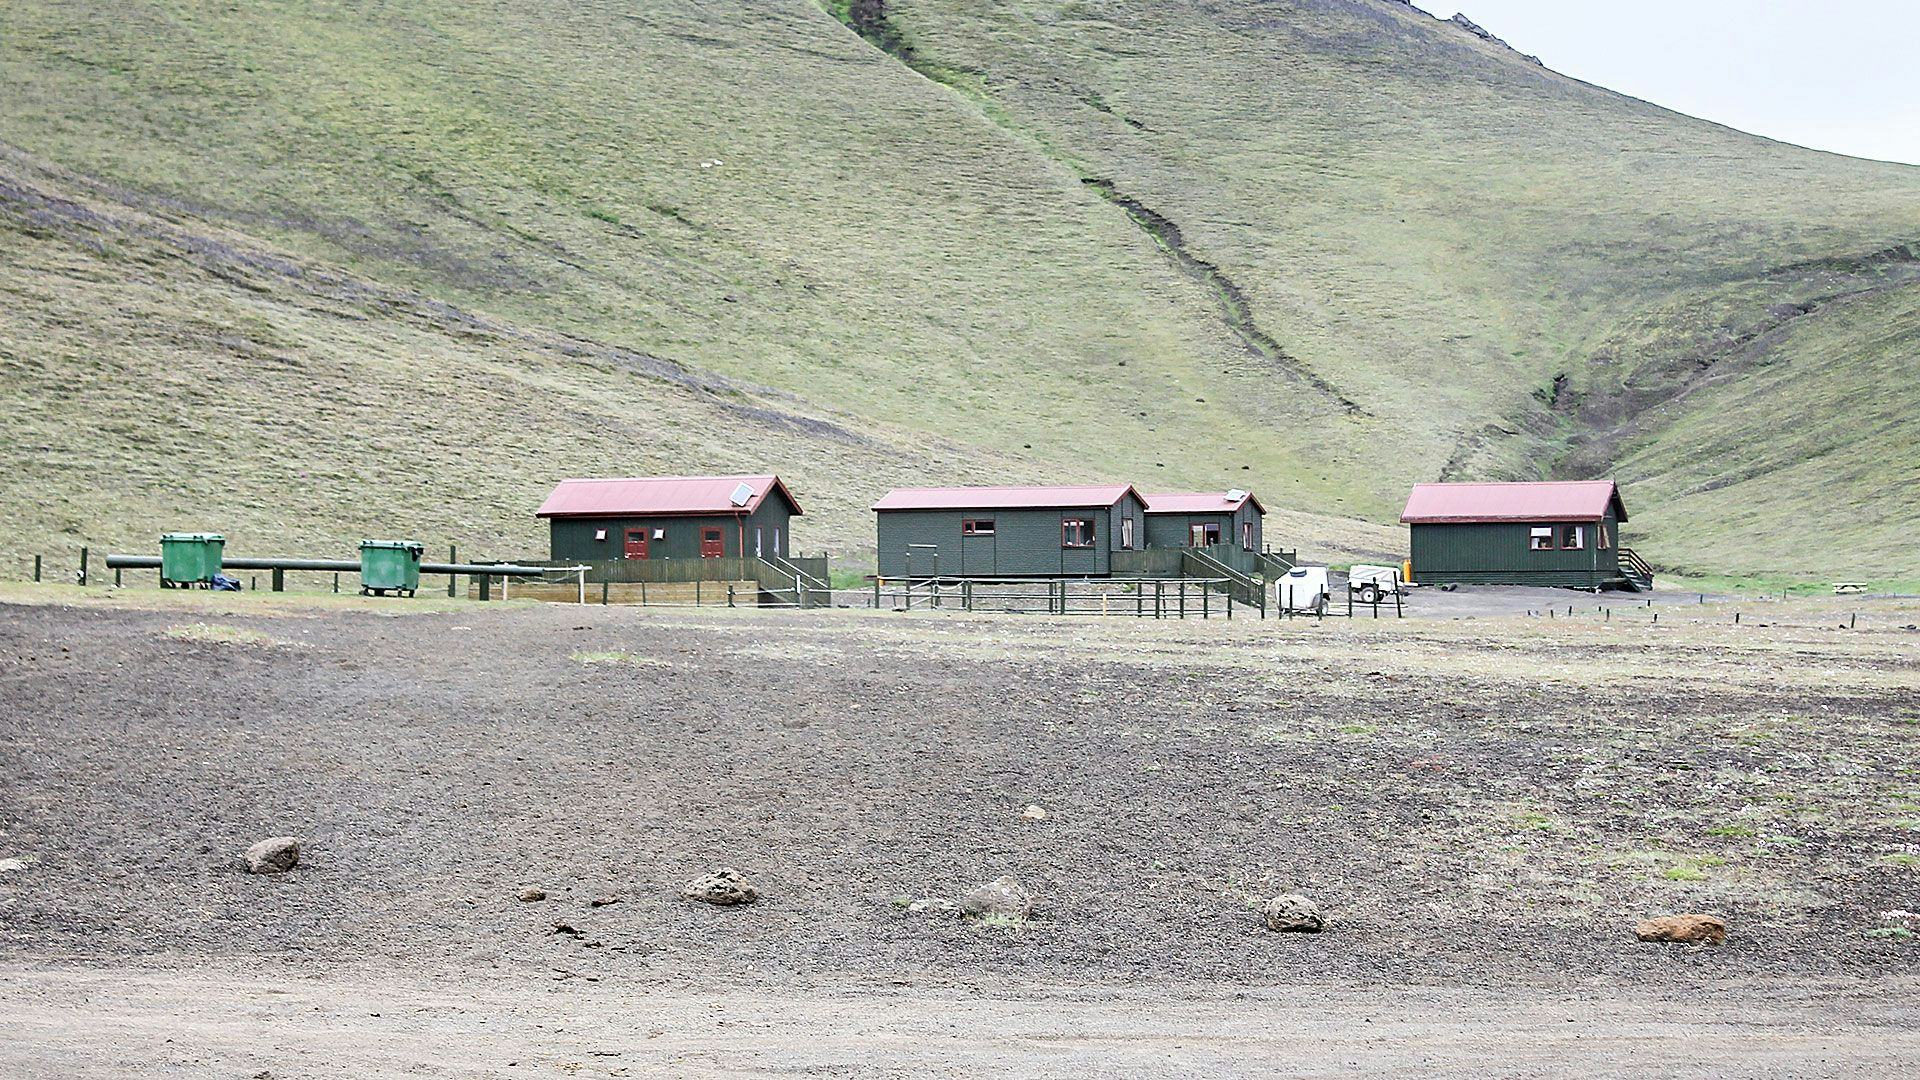 A rural landscape featuring three small structured cabins or shelters